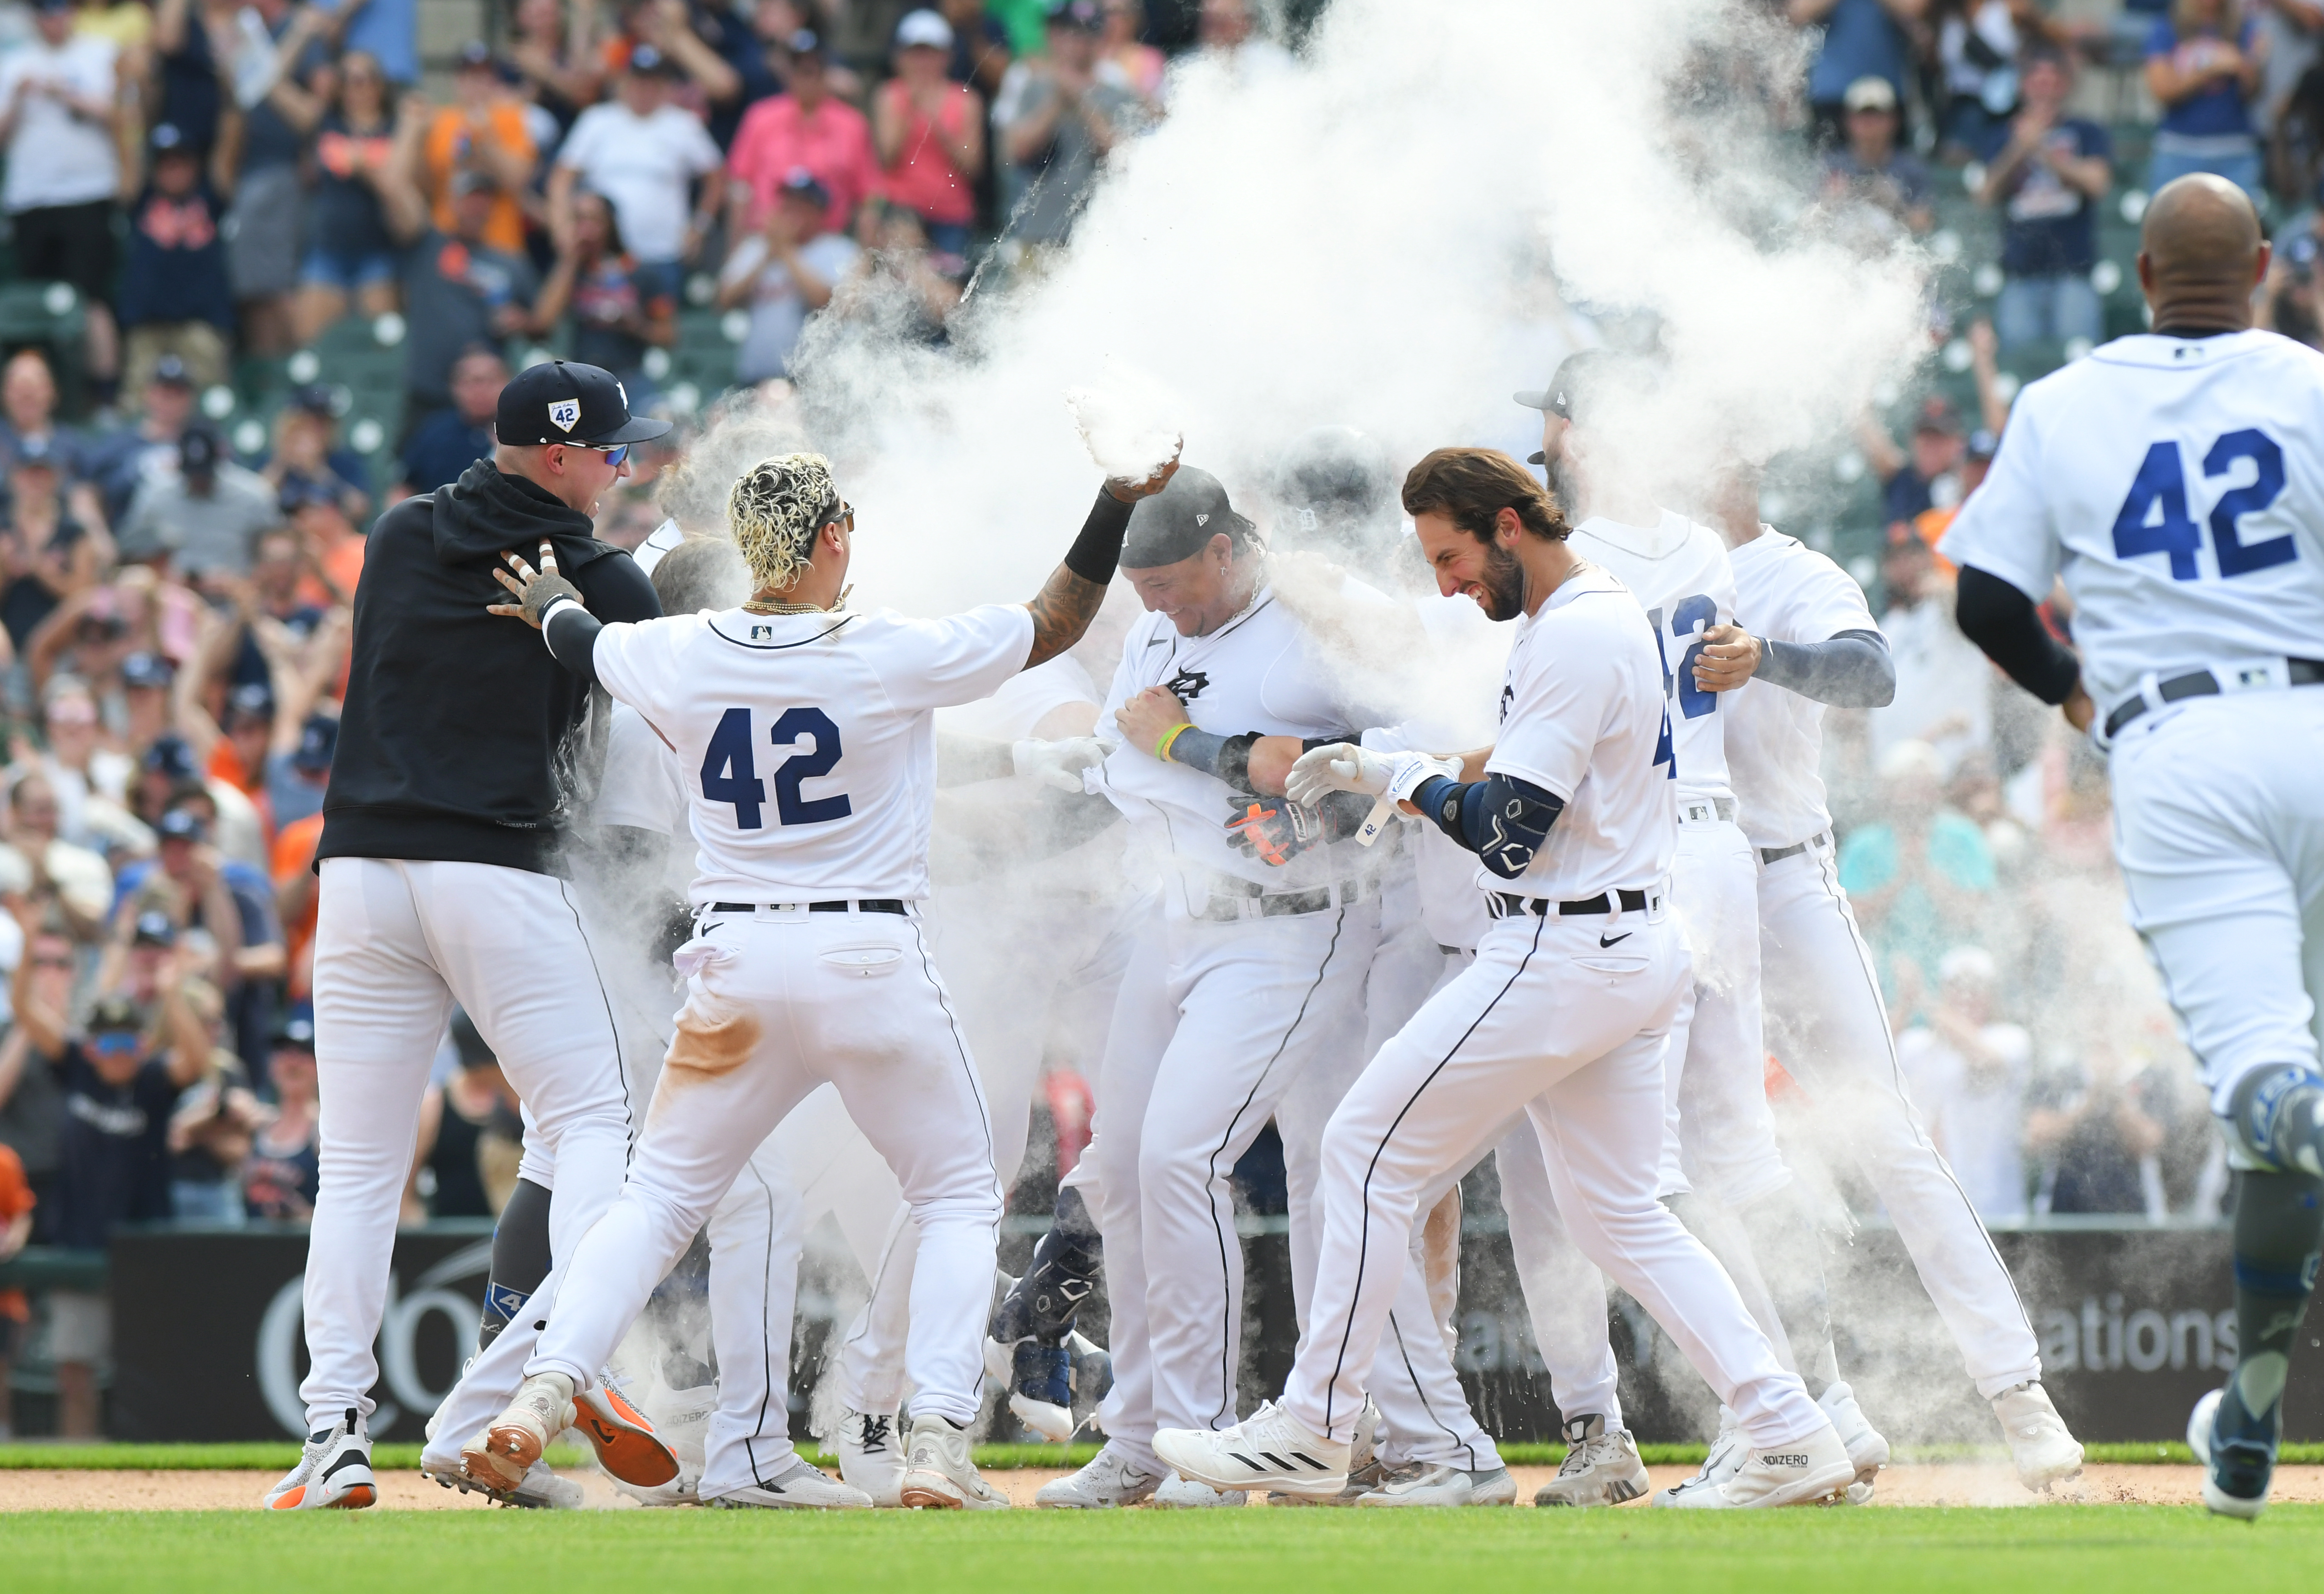 Ramblings: It's great to see the Tigers bounce back after Baez benching,  6-game losing streak